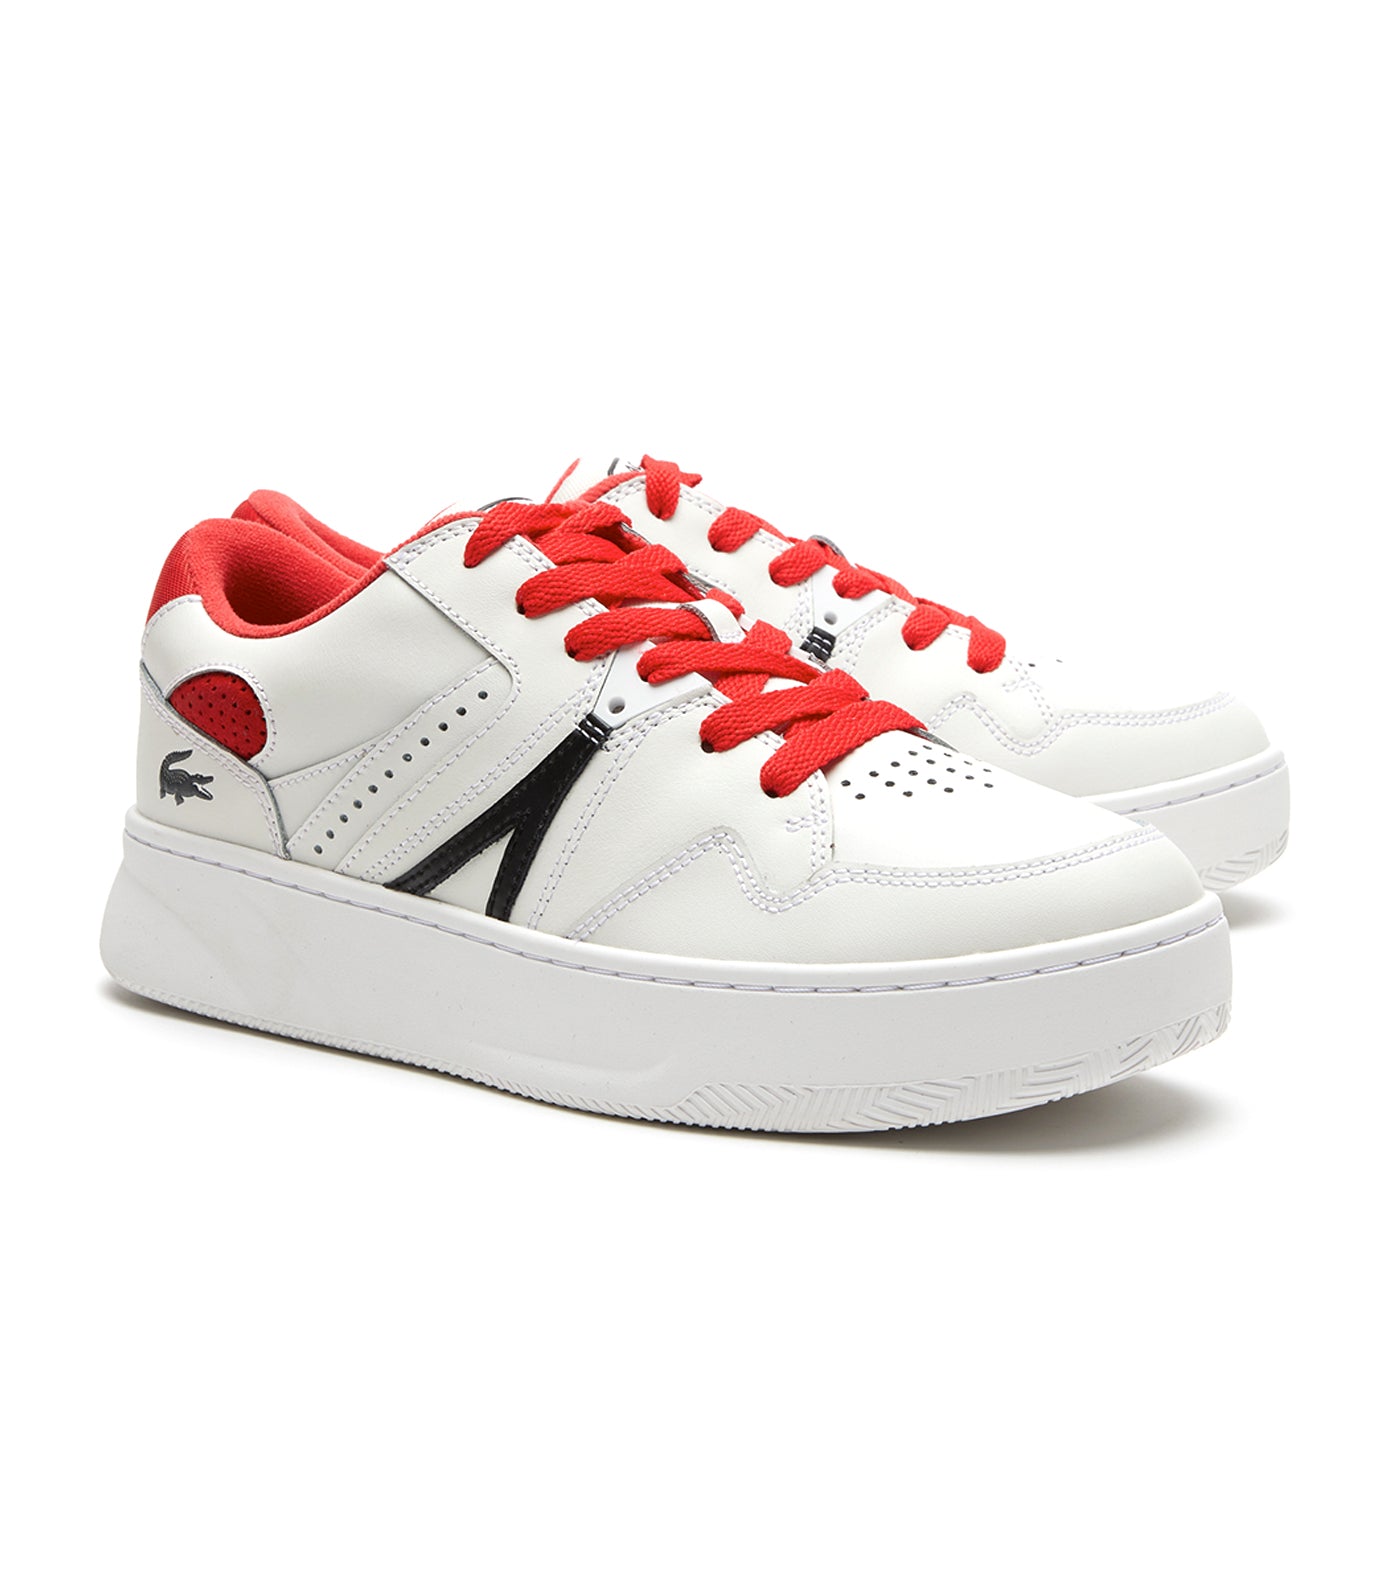 Men's L005 Leather Color-Pop Sneakers White/Red